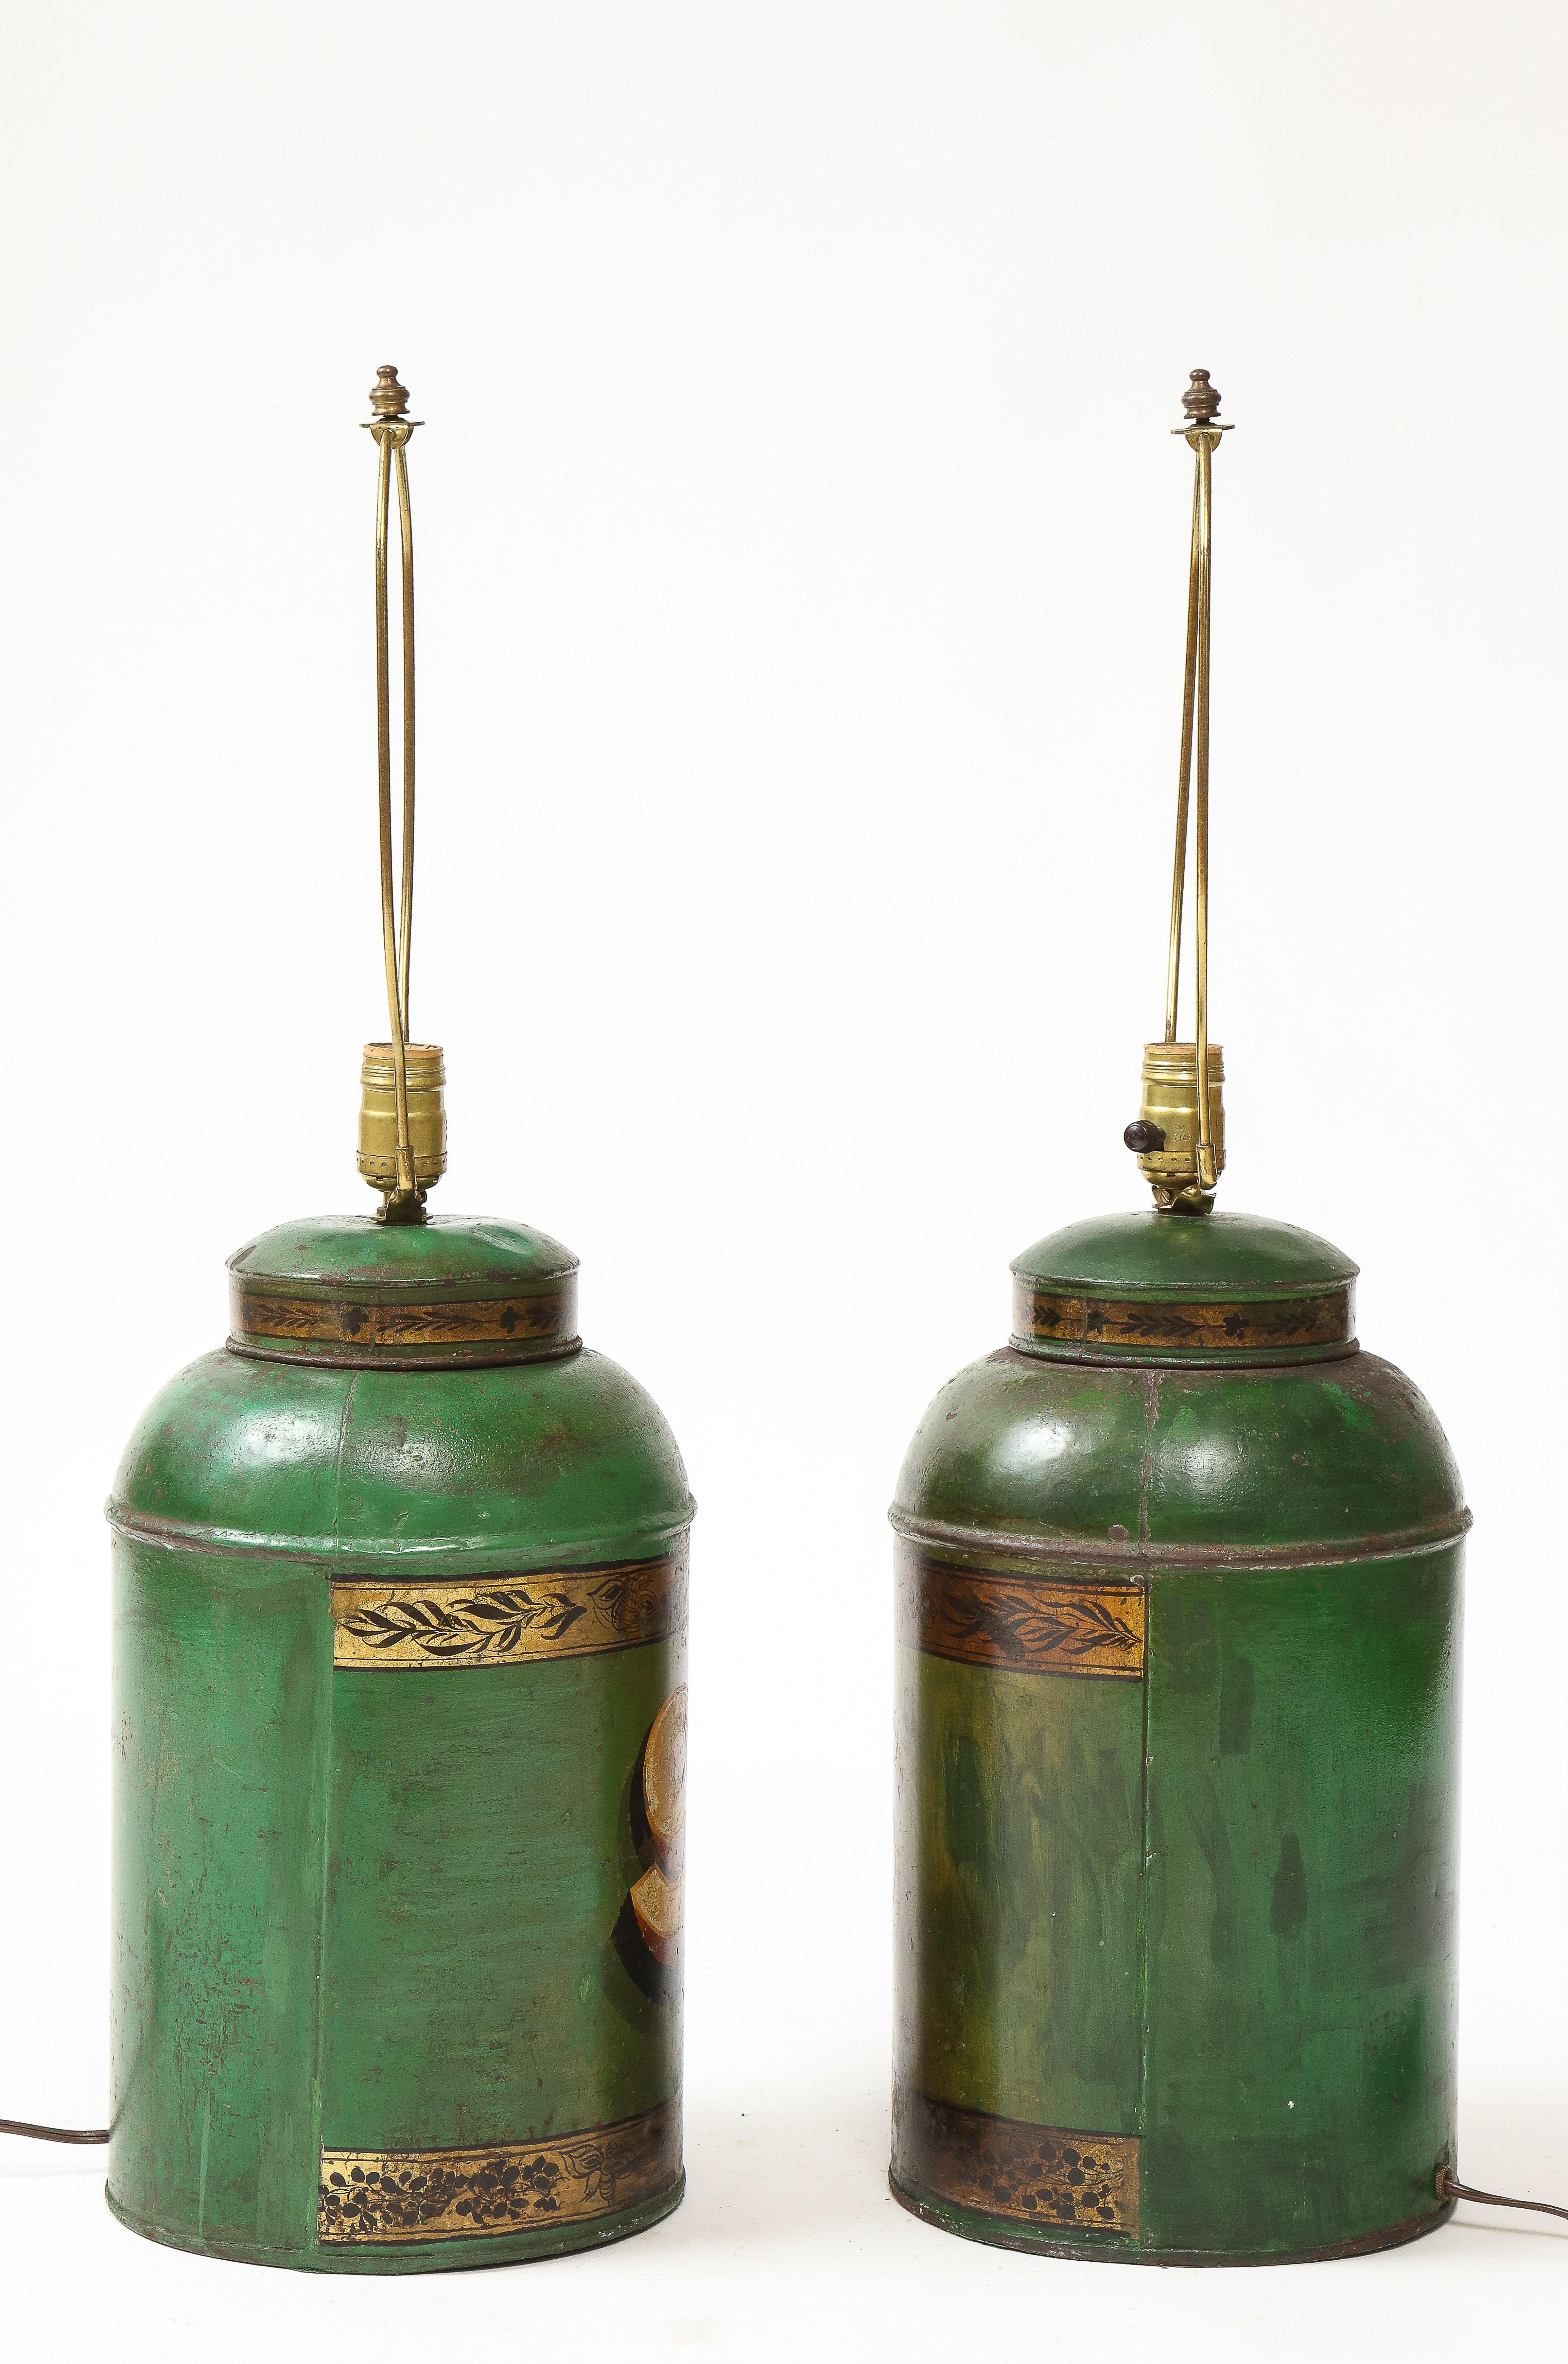 Hand-Painted Pair of English Green and Gilt Tôle Tea Canister Lamps